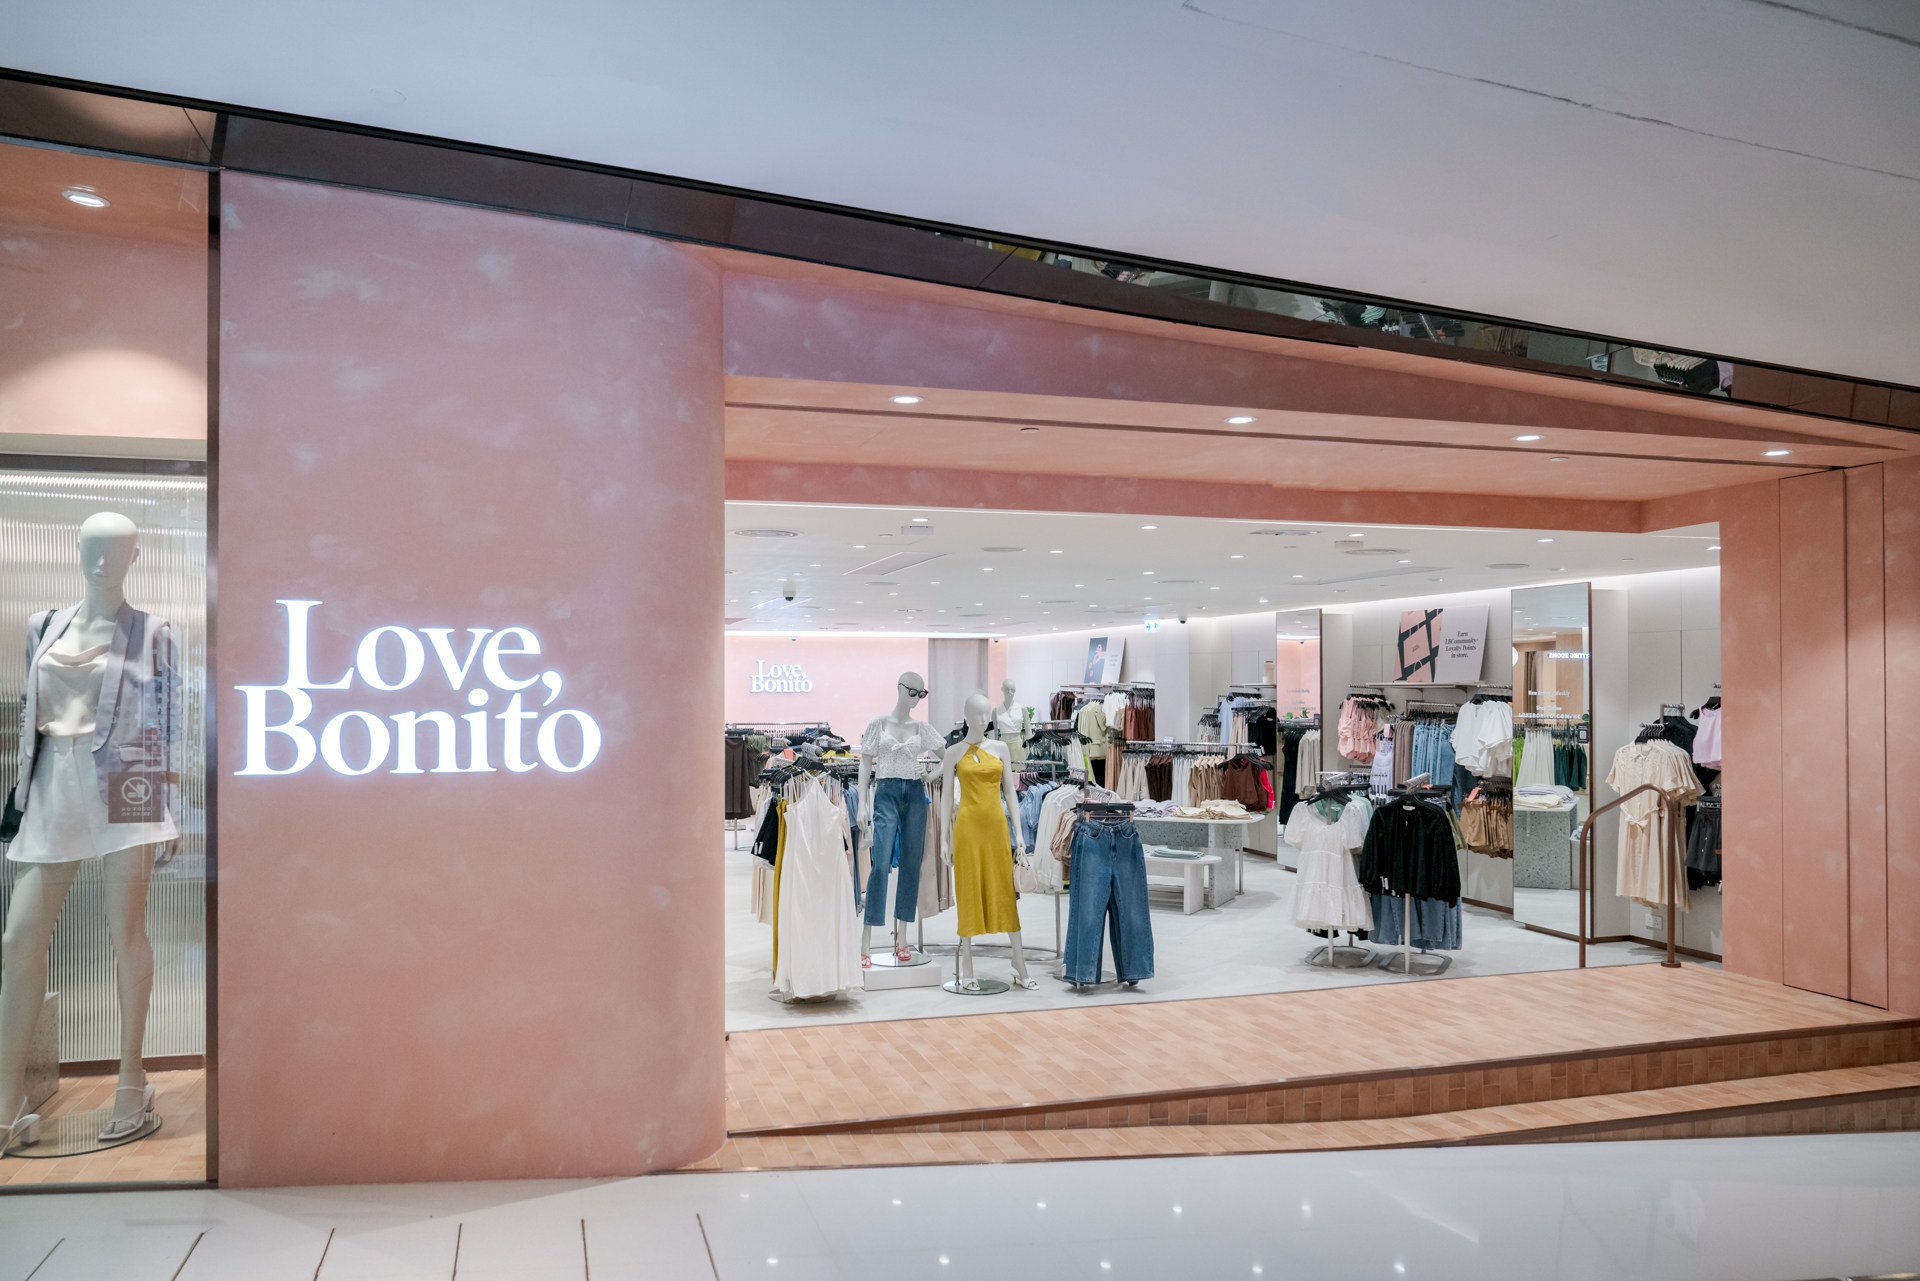 AsiaeCommerceAwards 2021 highlight: How Love, Bonito's tie-up with